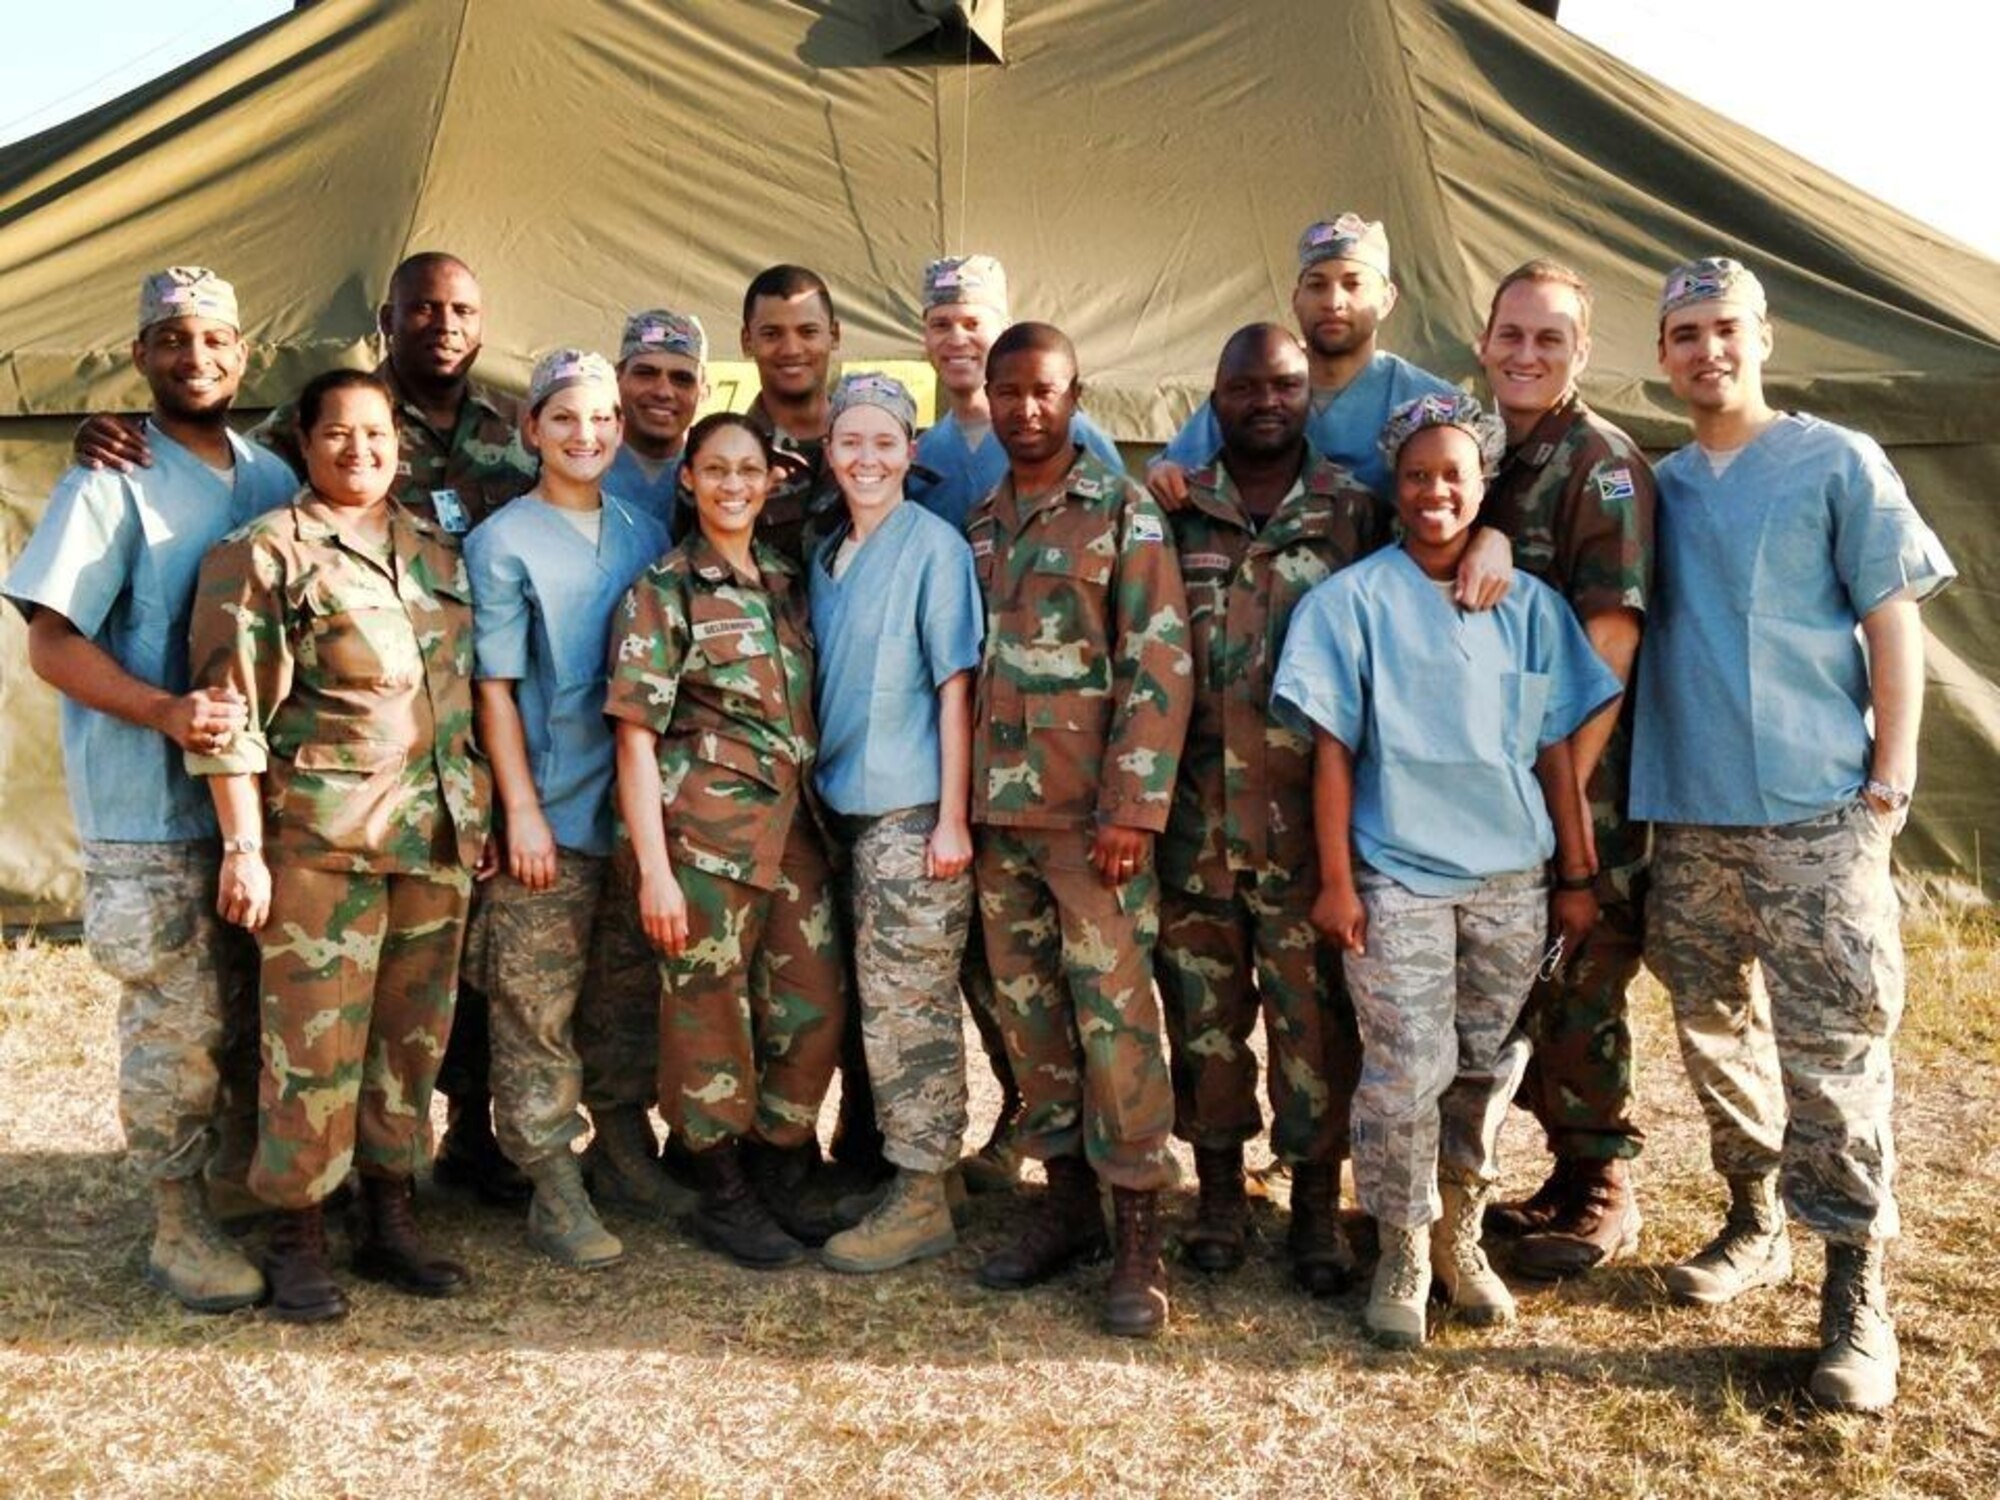 Air Force dental teams and South African dentists participated in Shared Accord 13, July 24-Aug. 7, King Williams' Town, Eastern Cape province, South Africa. Three Airmen from Aviano participated in the humanitarian mission, providing dental care to more than 500 patients in the King Williams’ Town area. (Courtesy photo)